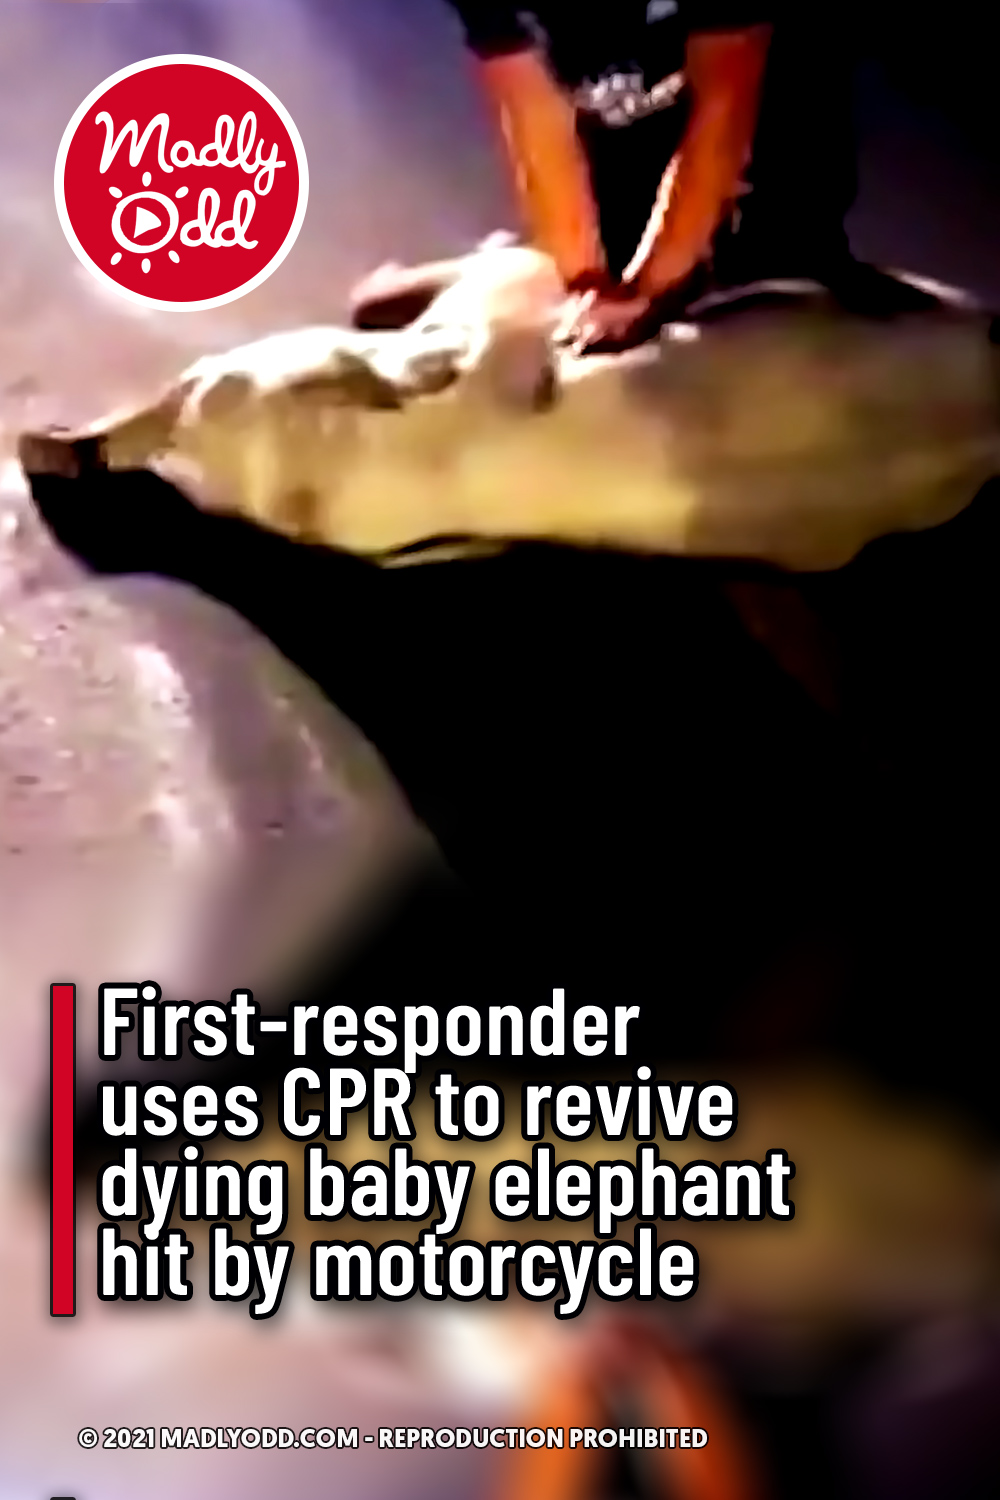 First-responder uses CPR to revive dying baby elephant hit by motorcycle